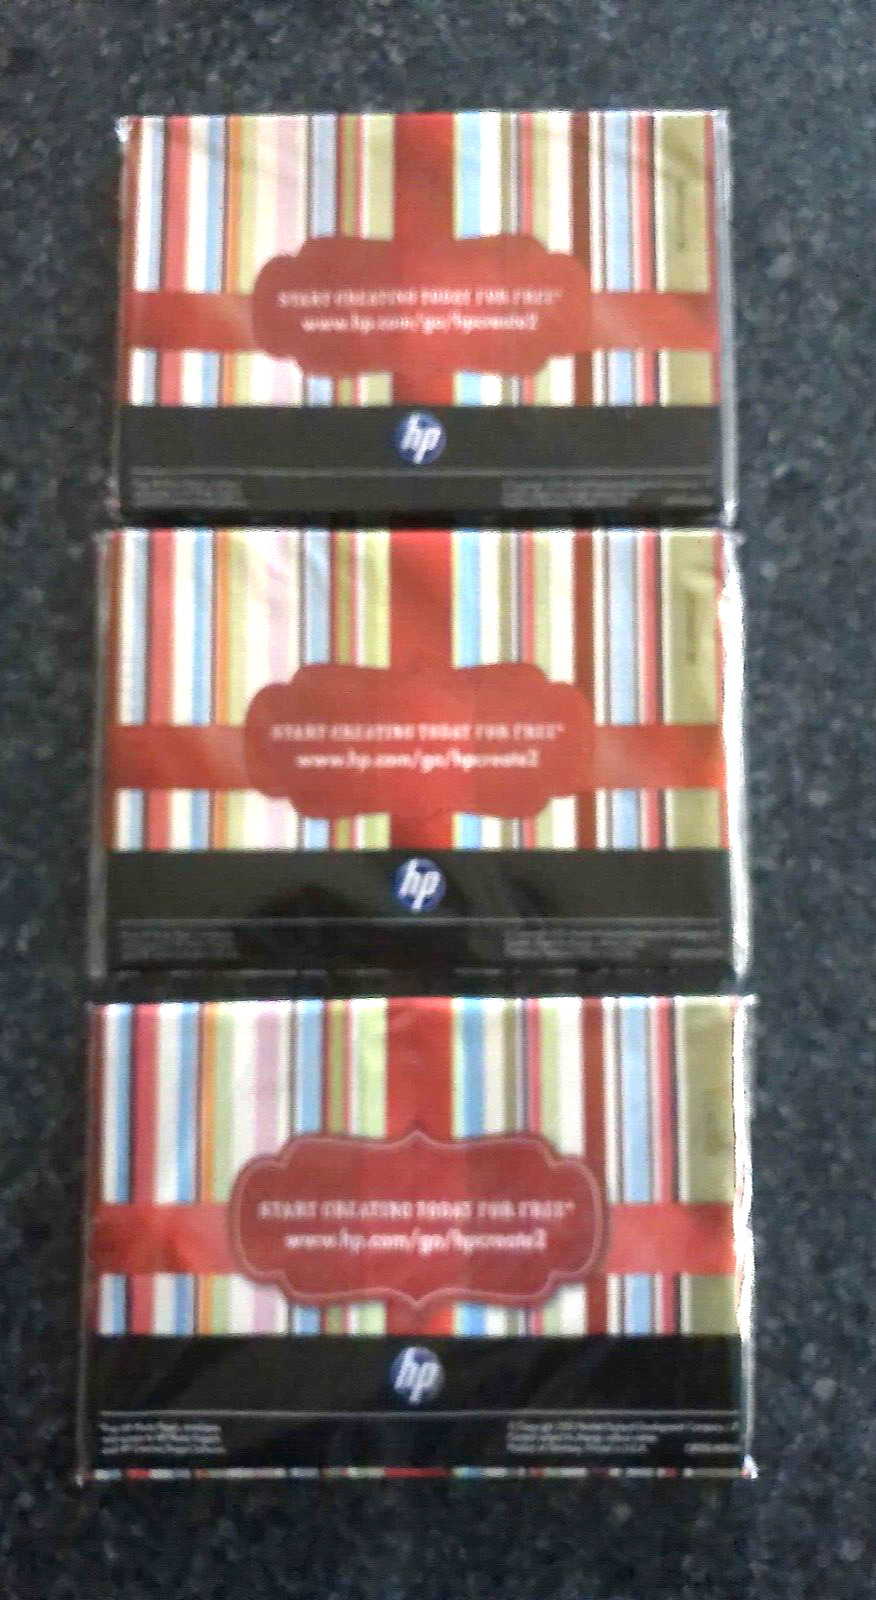 3 PACKS OF HP PHOTO PAPERS